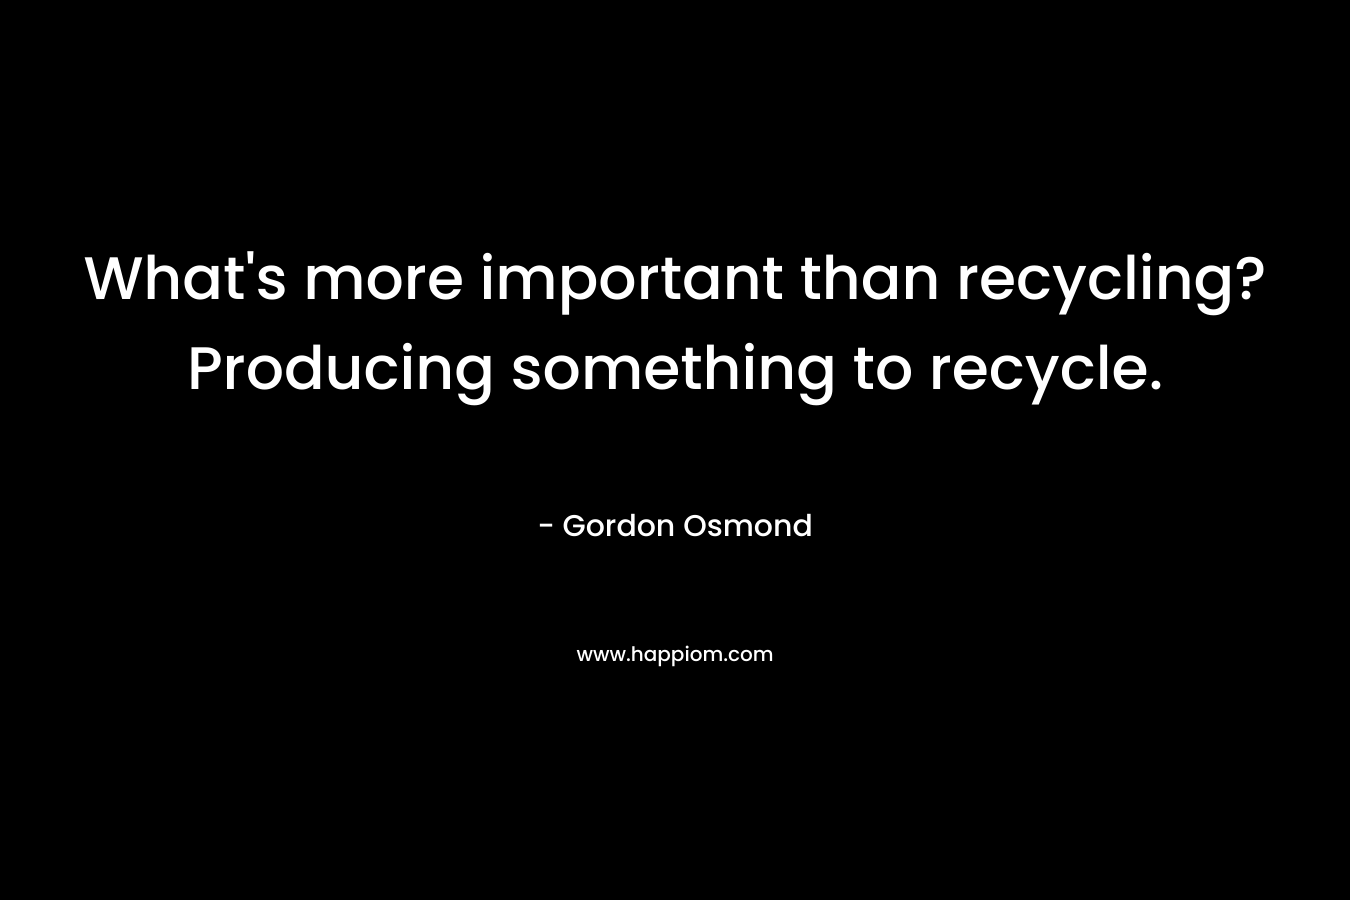 What’s more important than recycling? Producing something to recycle. – Gordon Osmond